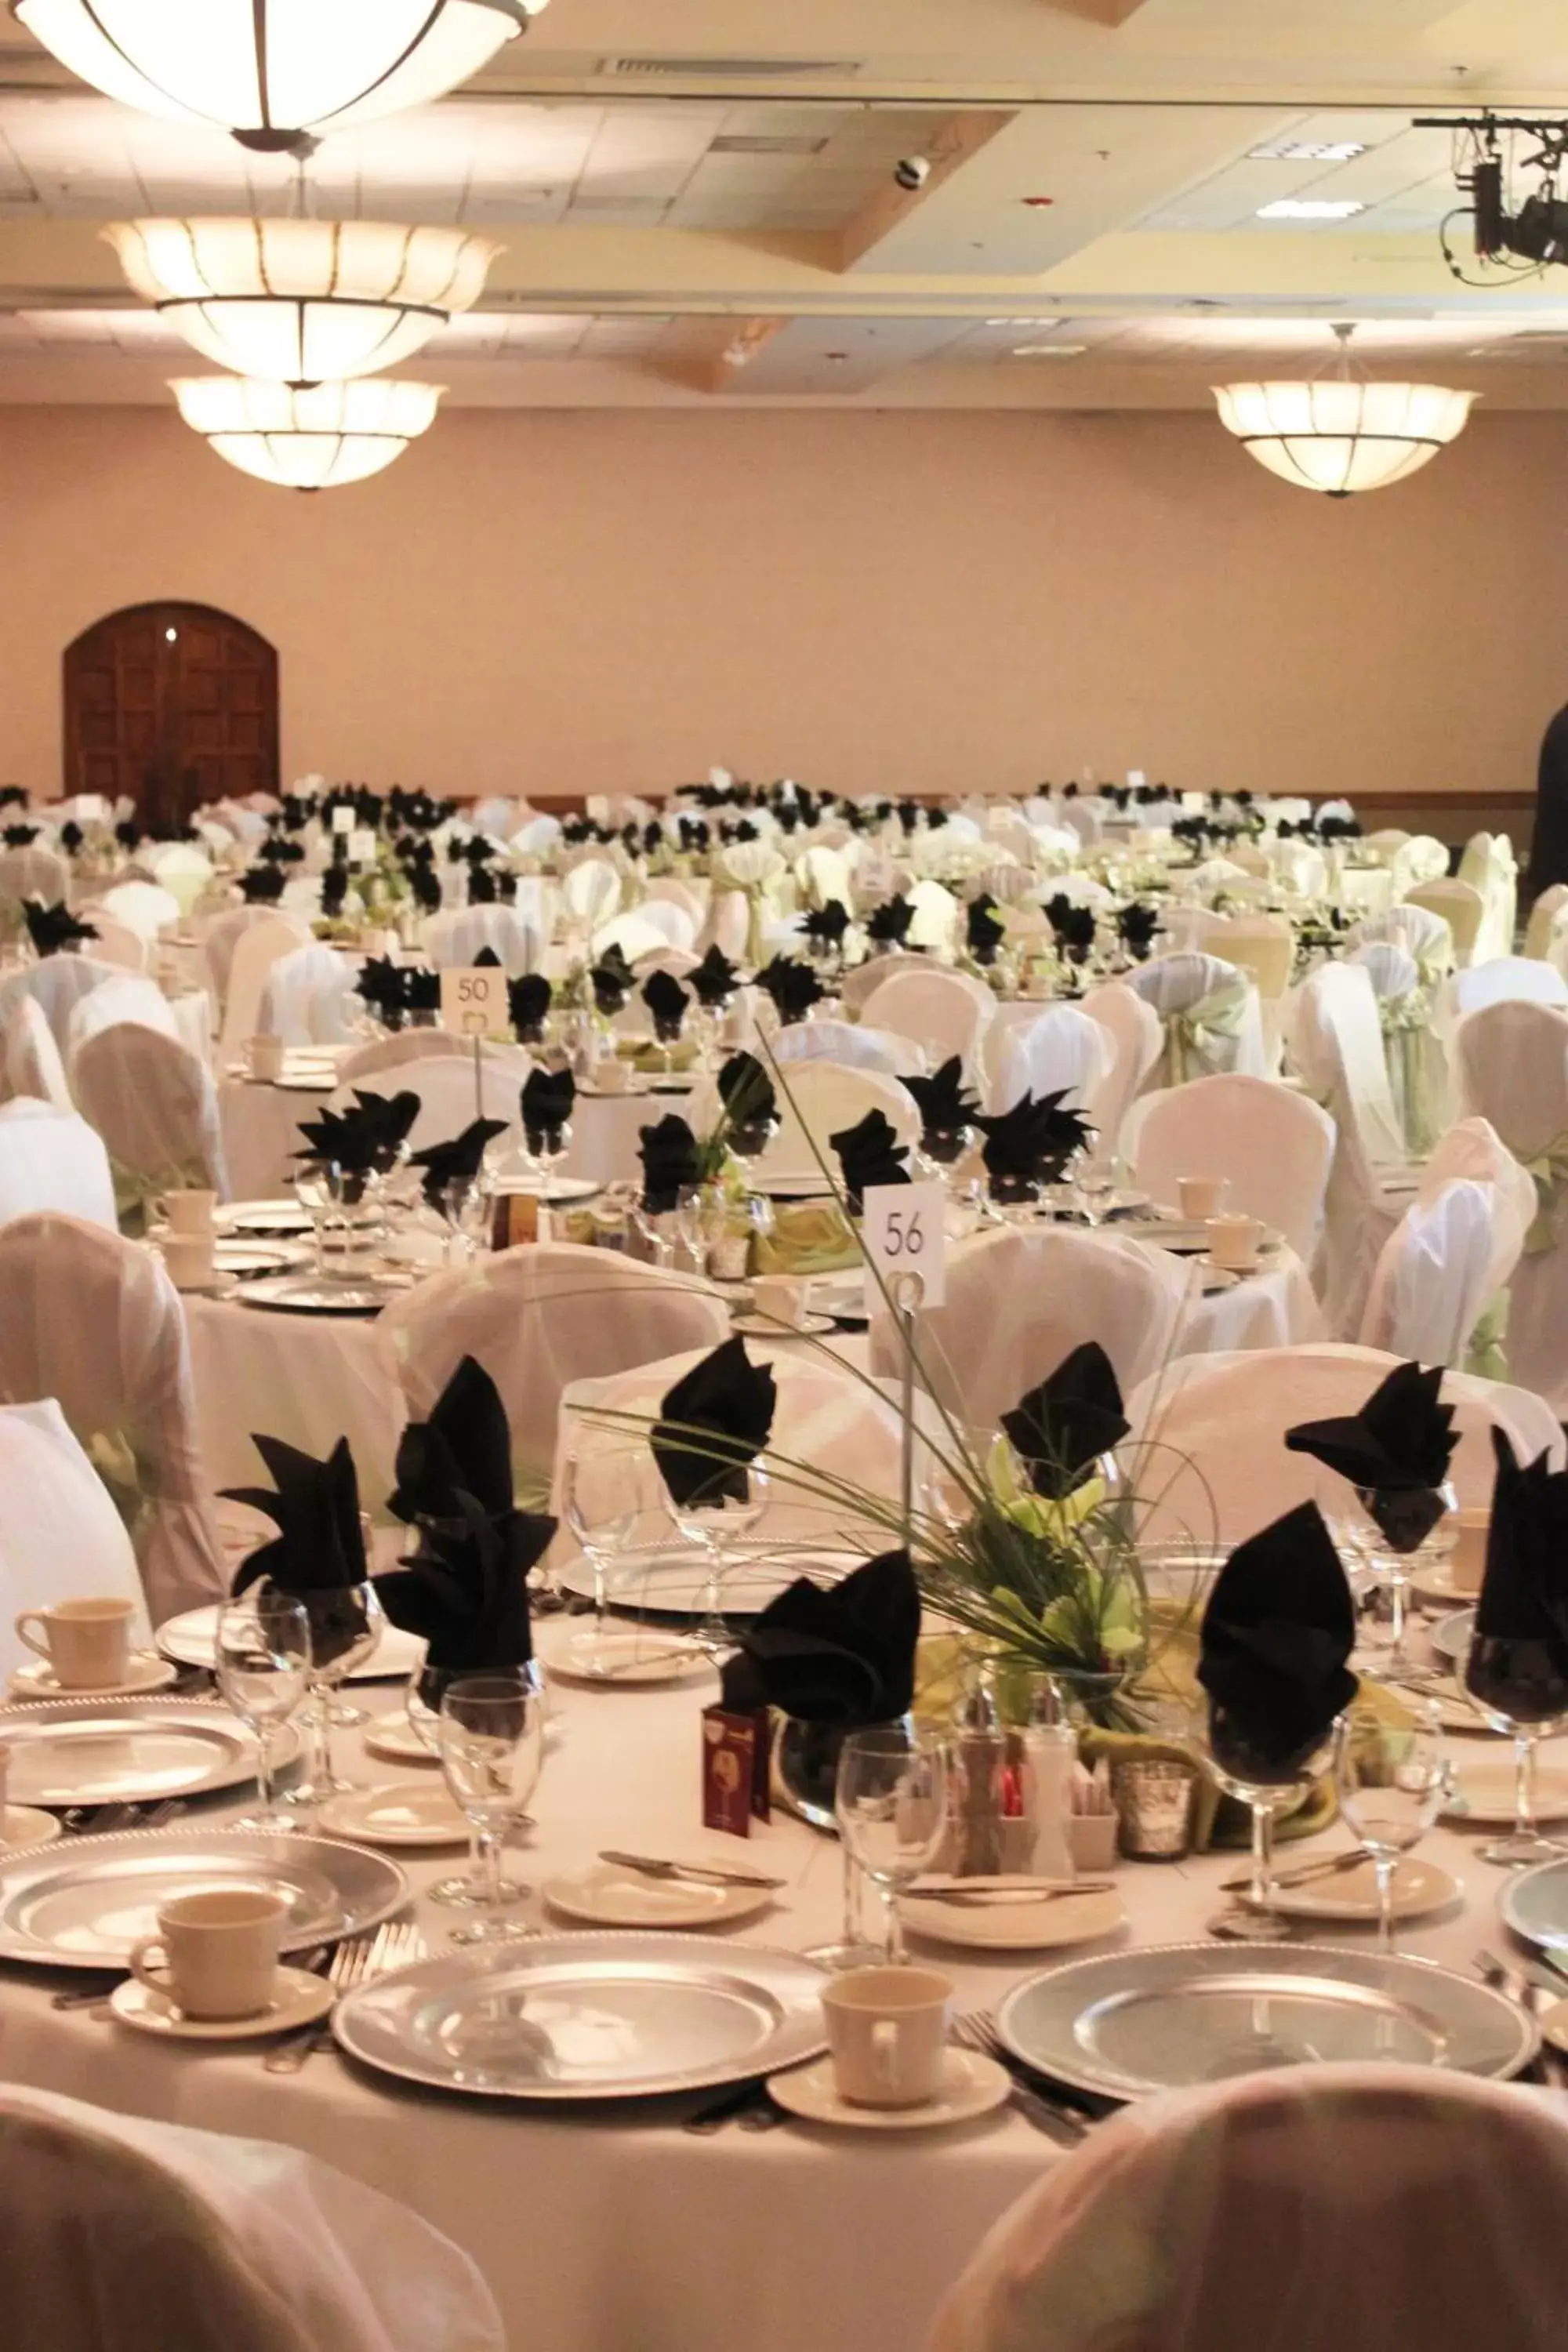 Banquet/Function facilities, Banquet Facilities in Riverside Hotel, BW Premier Collection